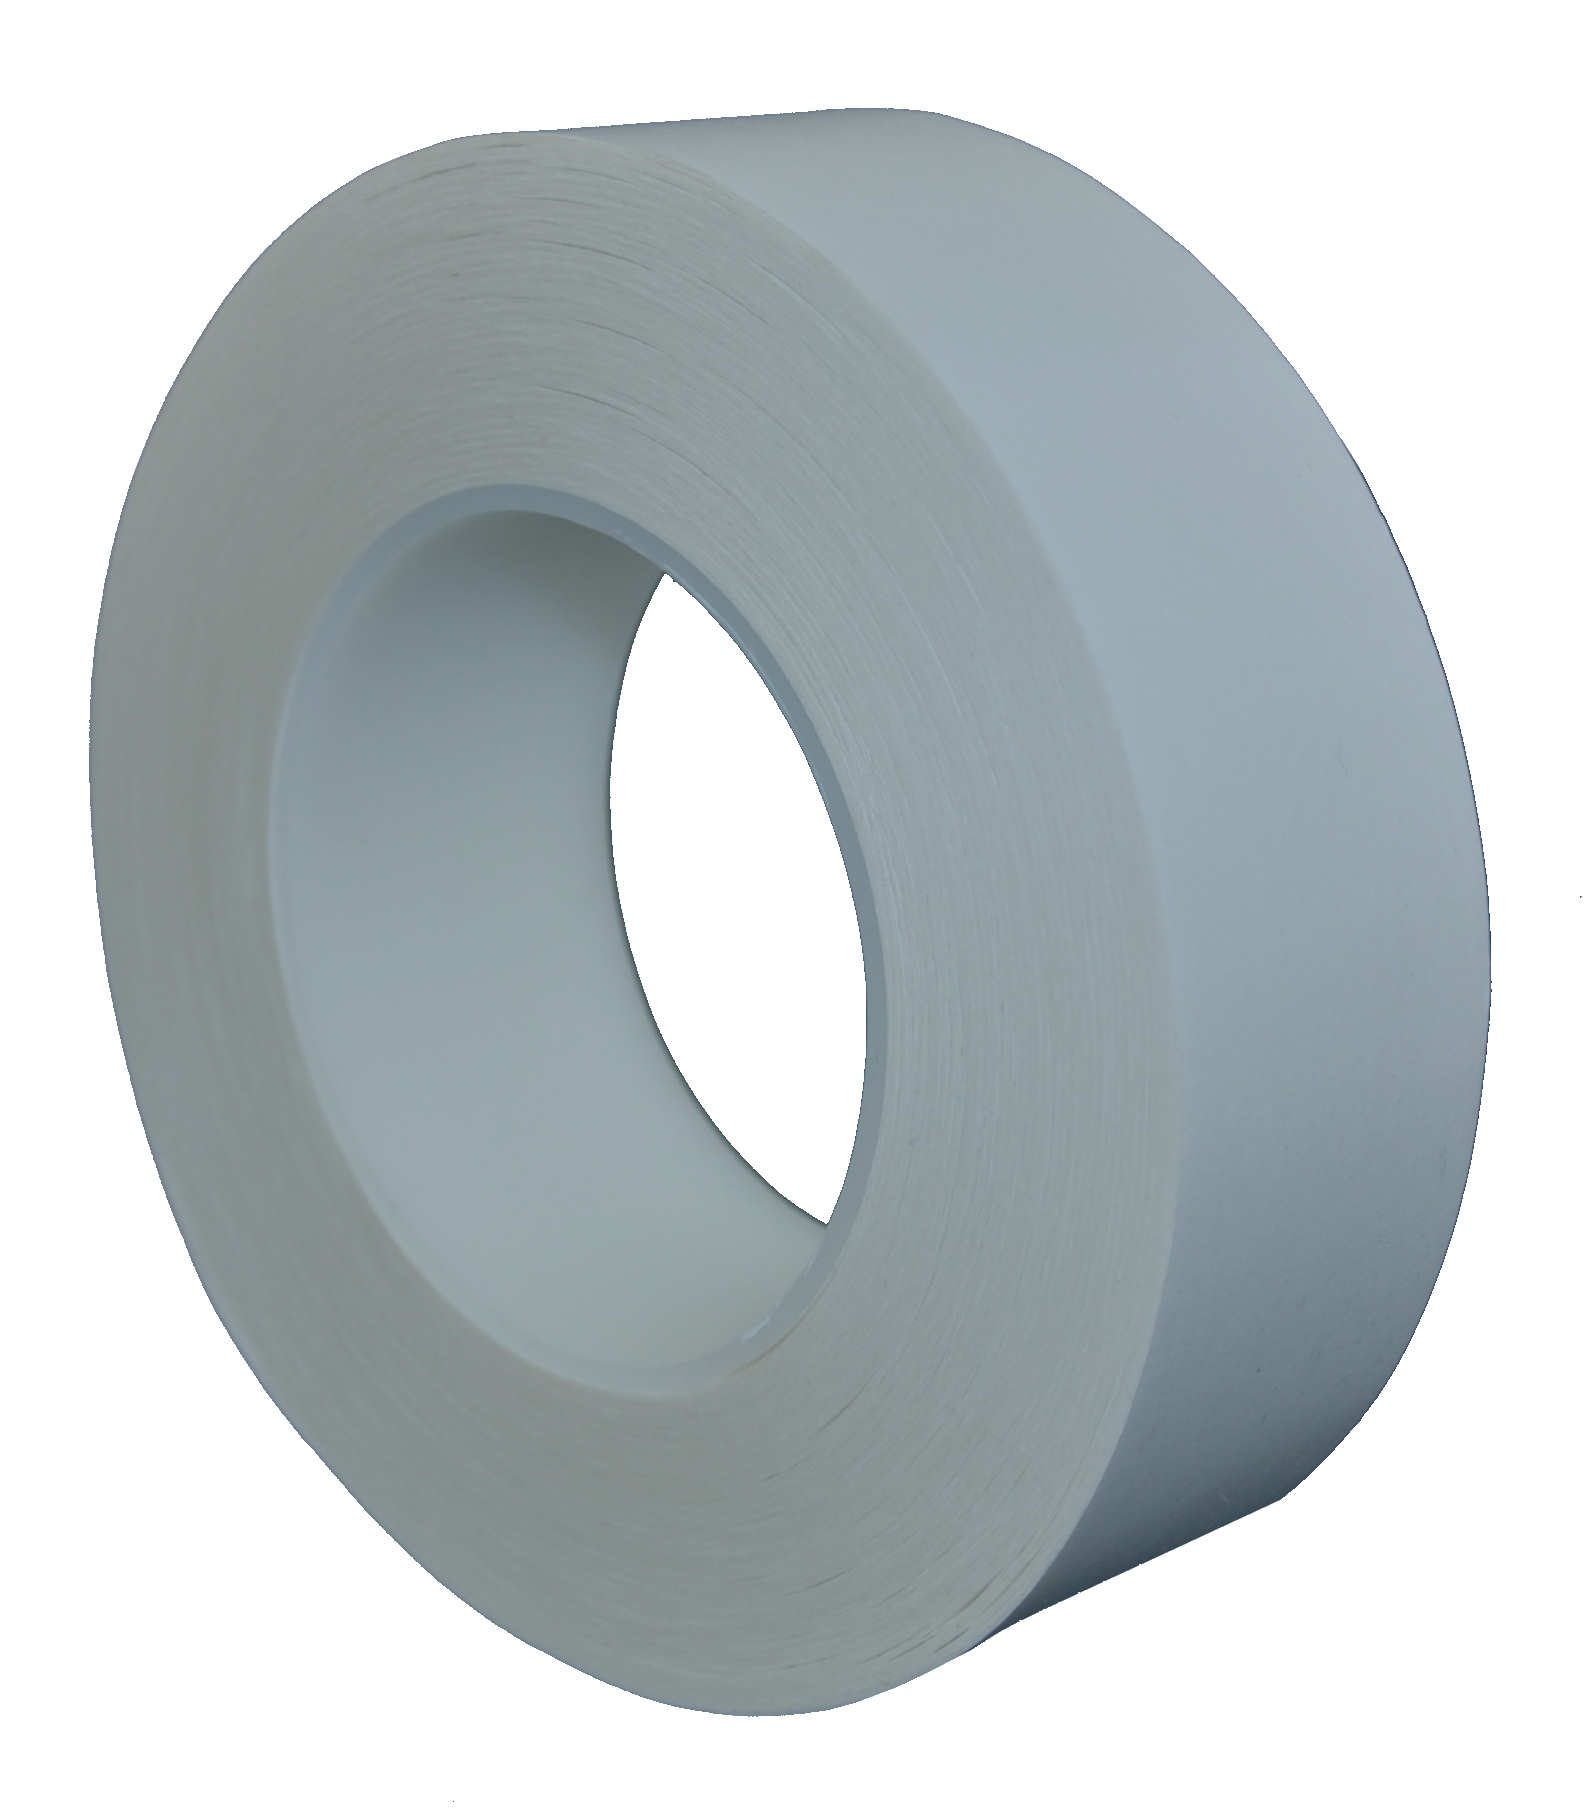 S-K-S dubbelzijdig plakband met polyester drager 480, transparant, 25 mm x 50 m, 0,09 mm